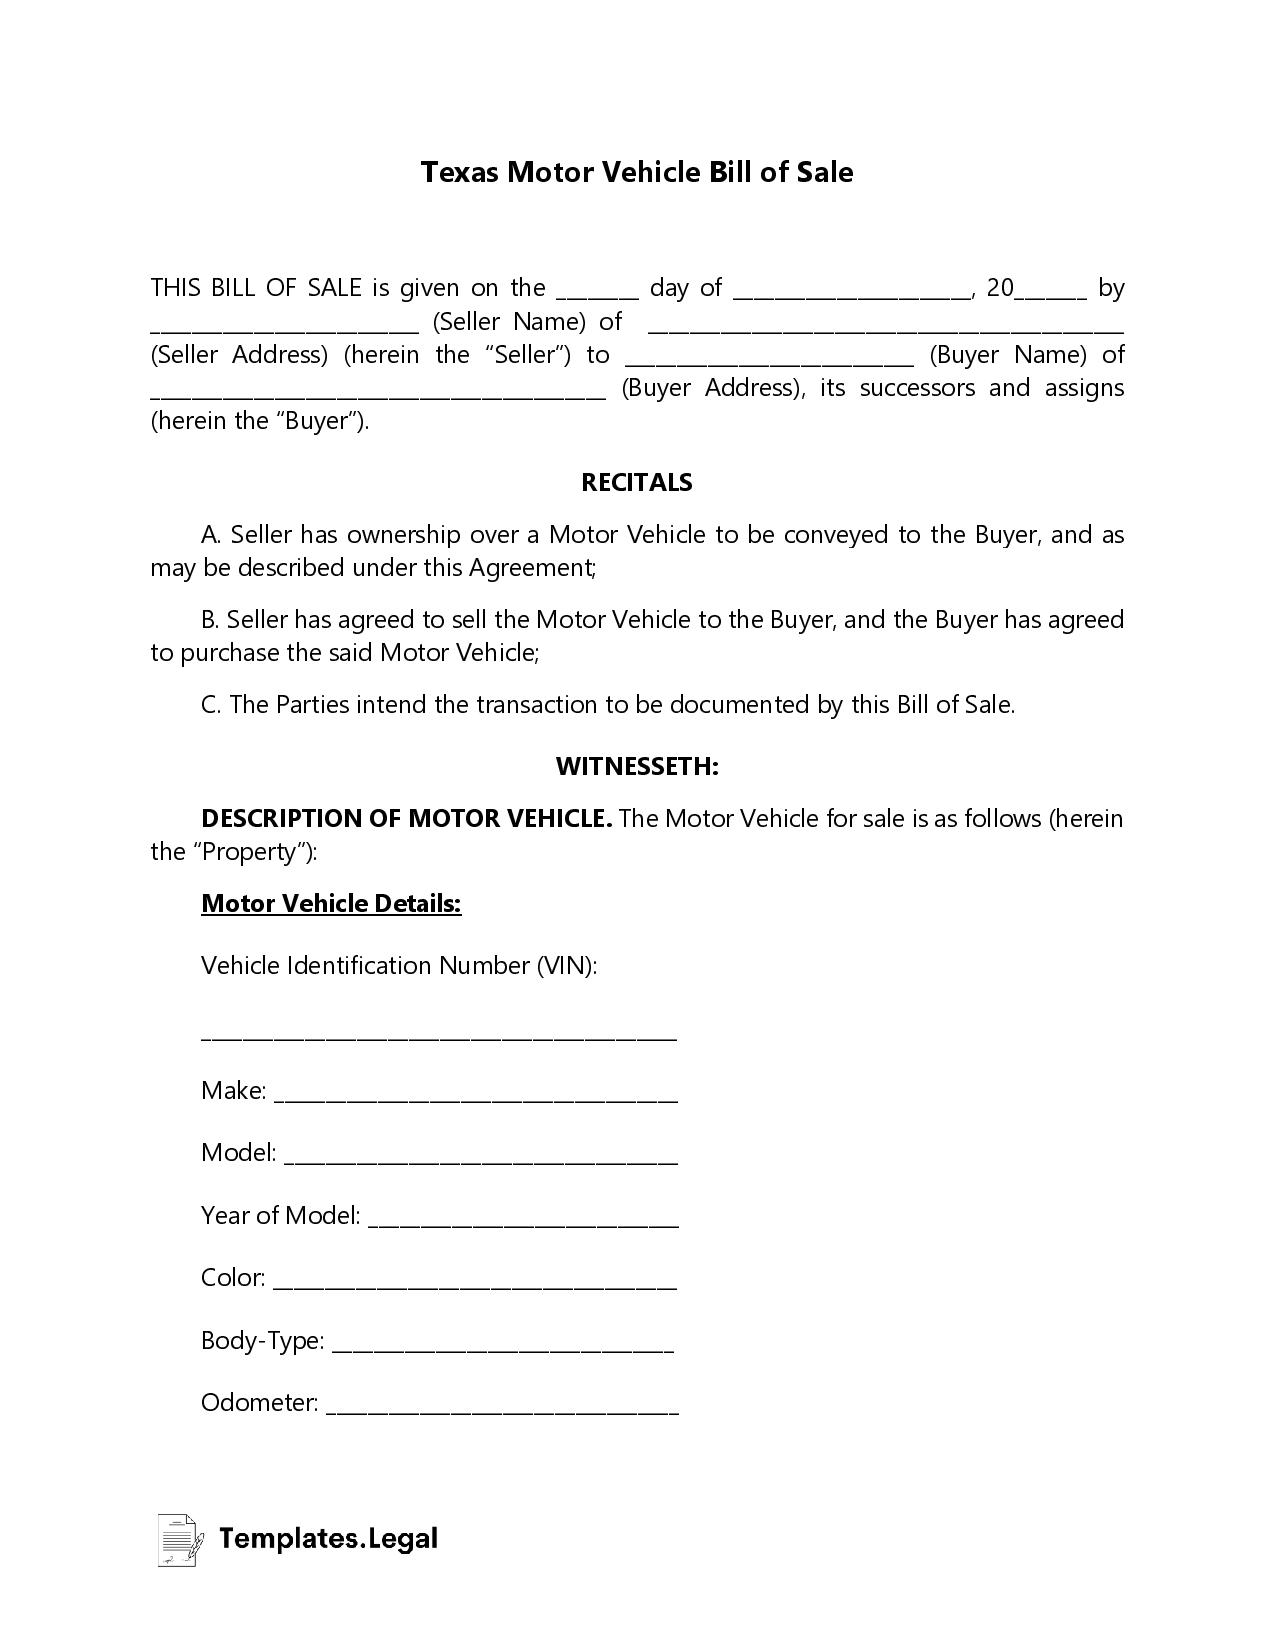 Texas Motor Vehicle Bill of Sale - Templates.Legal